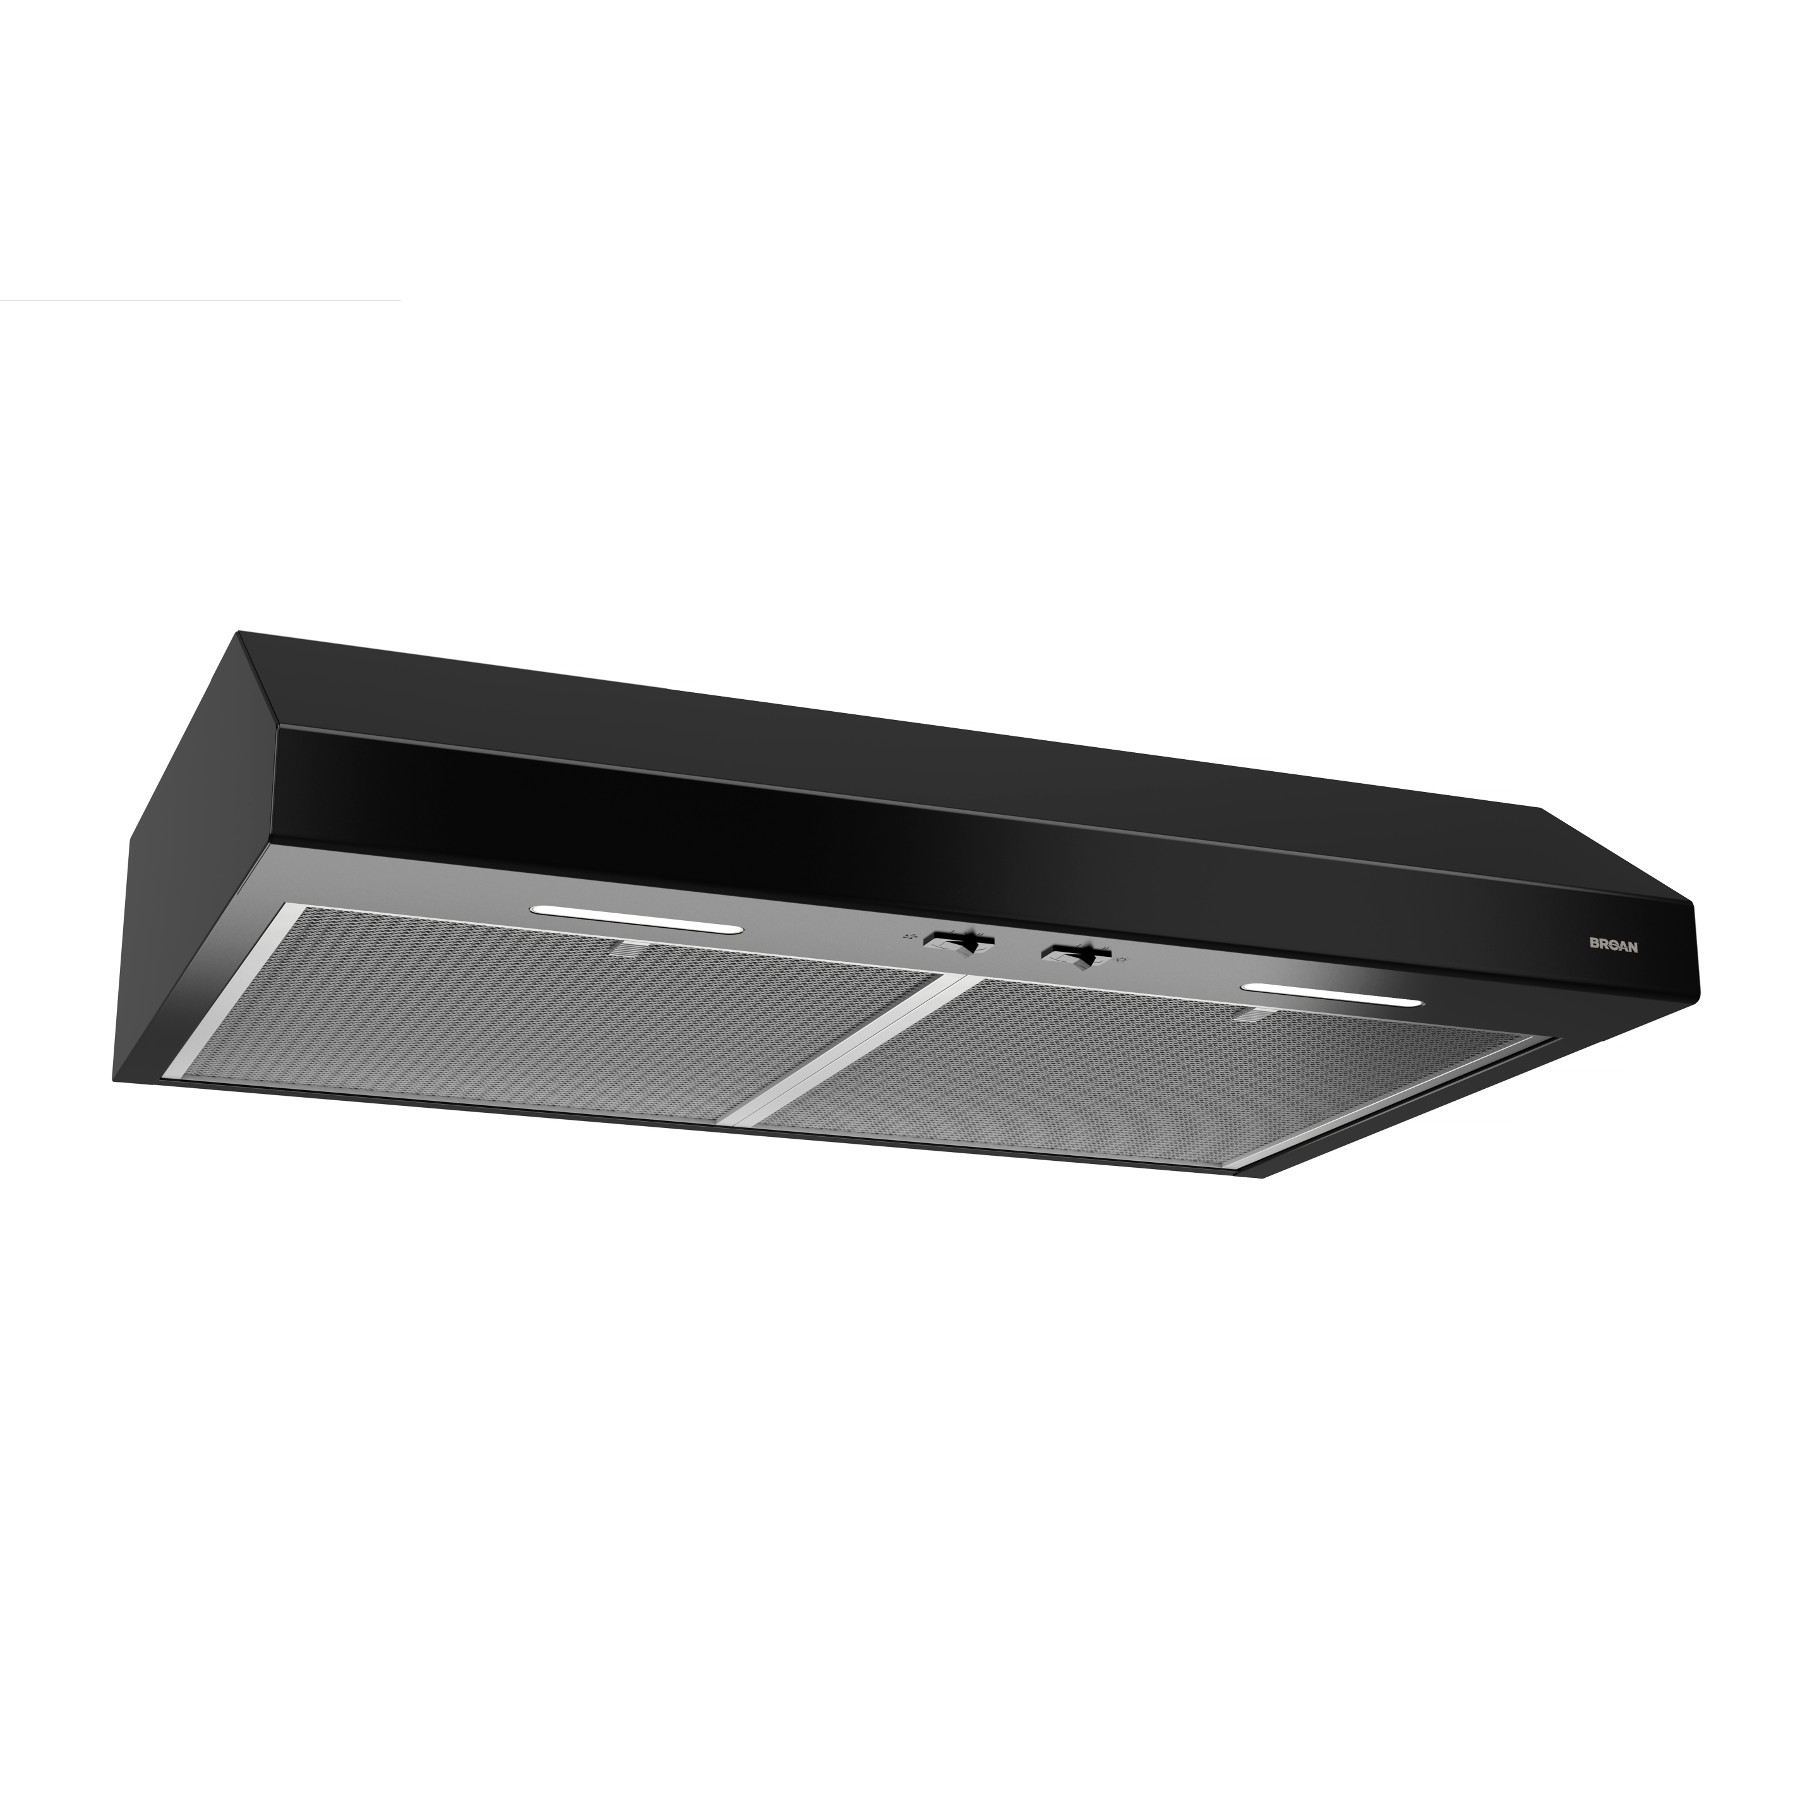 Broan-Nutone Allure 1 Ducted Aluminum Range Hood Filter - Power Townsend  Company